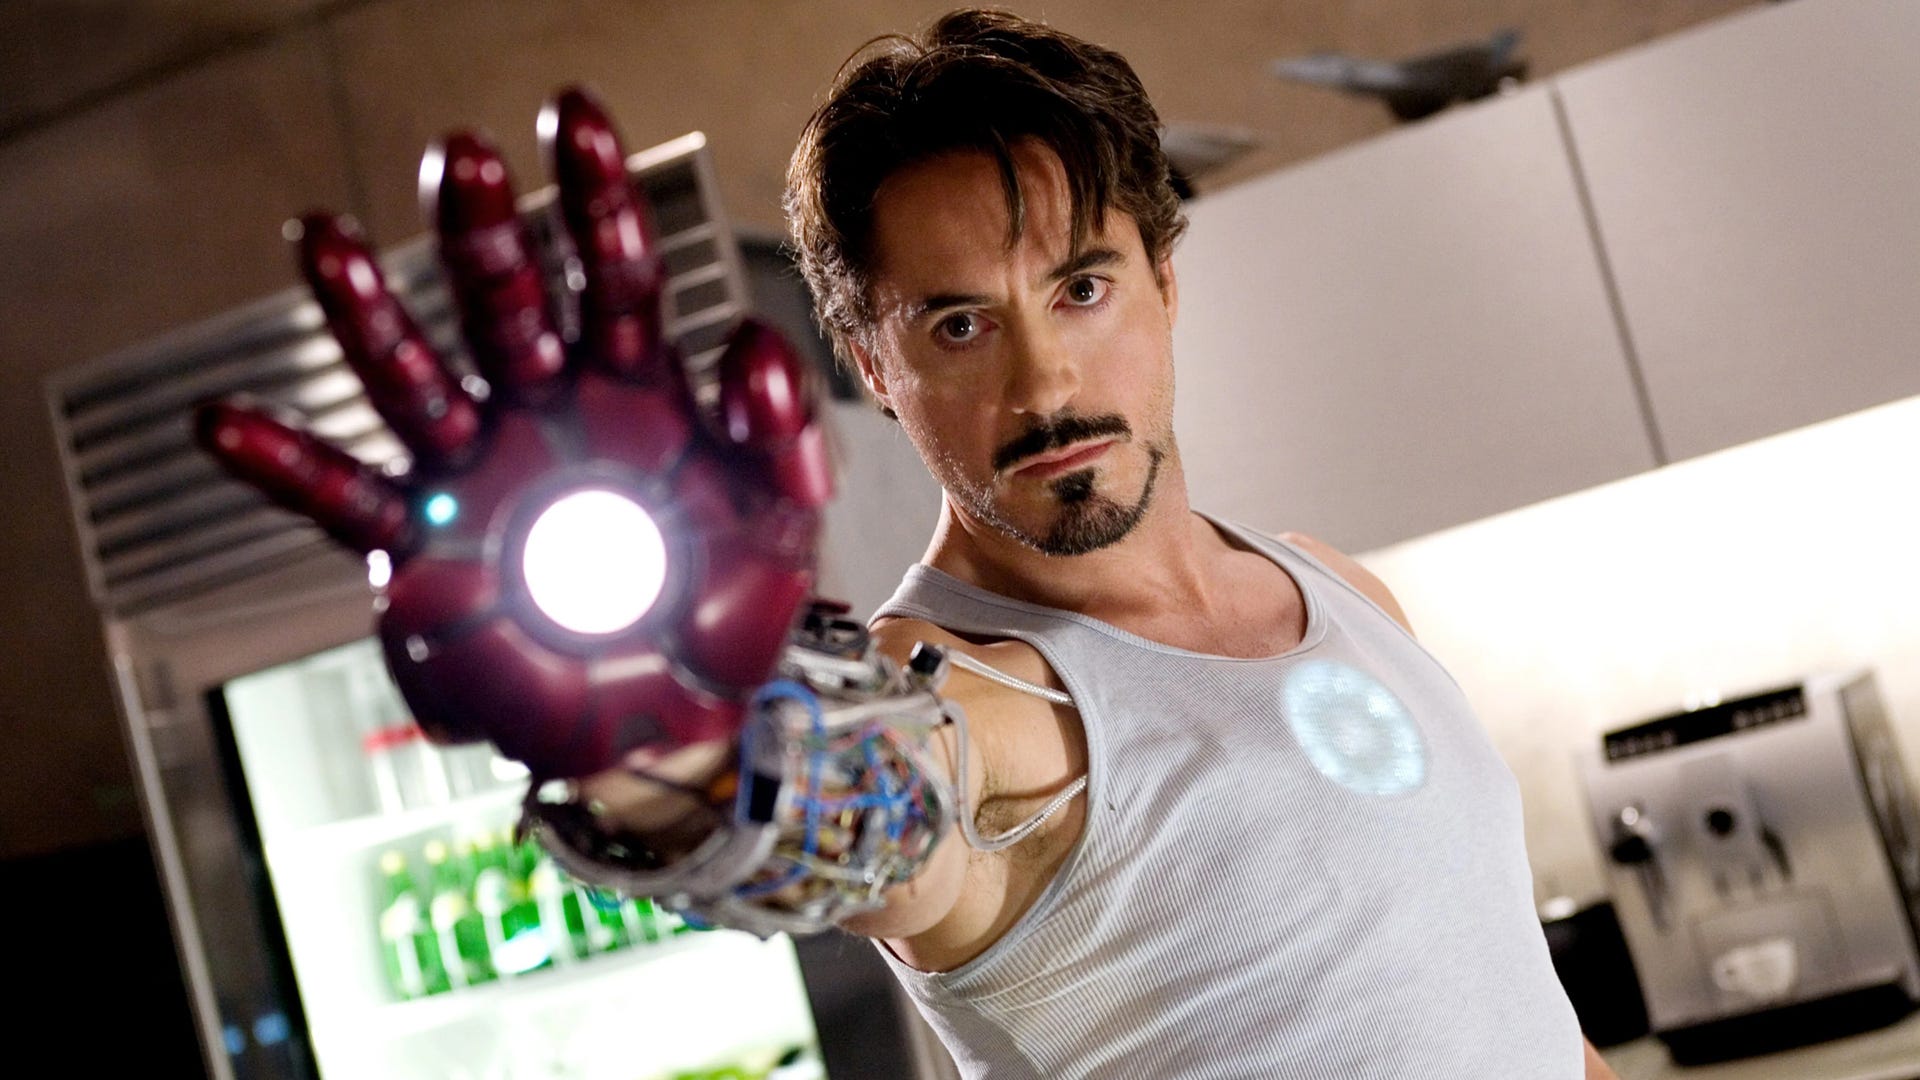 Robert Downey Jr. wouldn’t say no to coming back to Iron Man because you should “never, ever bet against Kevin Feige”